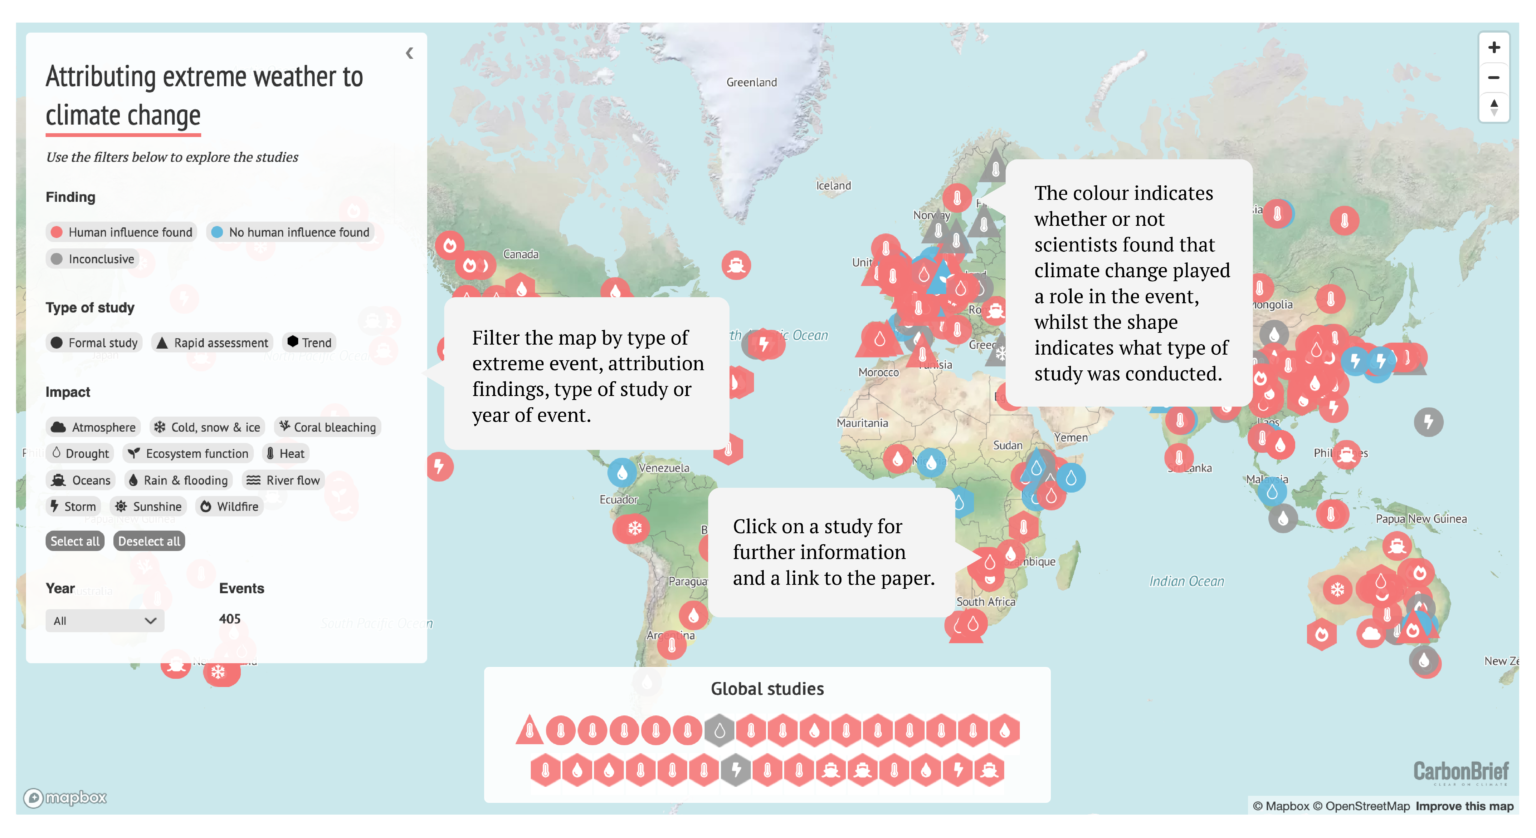 mapped-how-climate-change-affects-extreme-weather-around-the-world